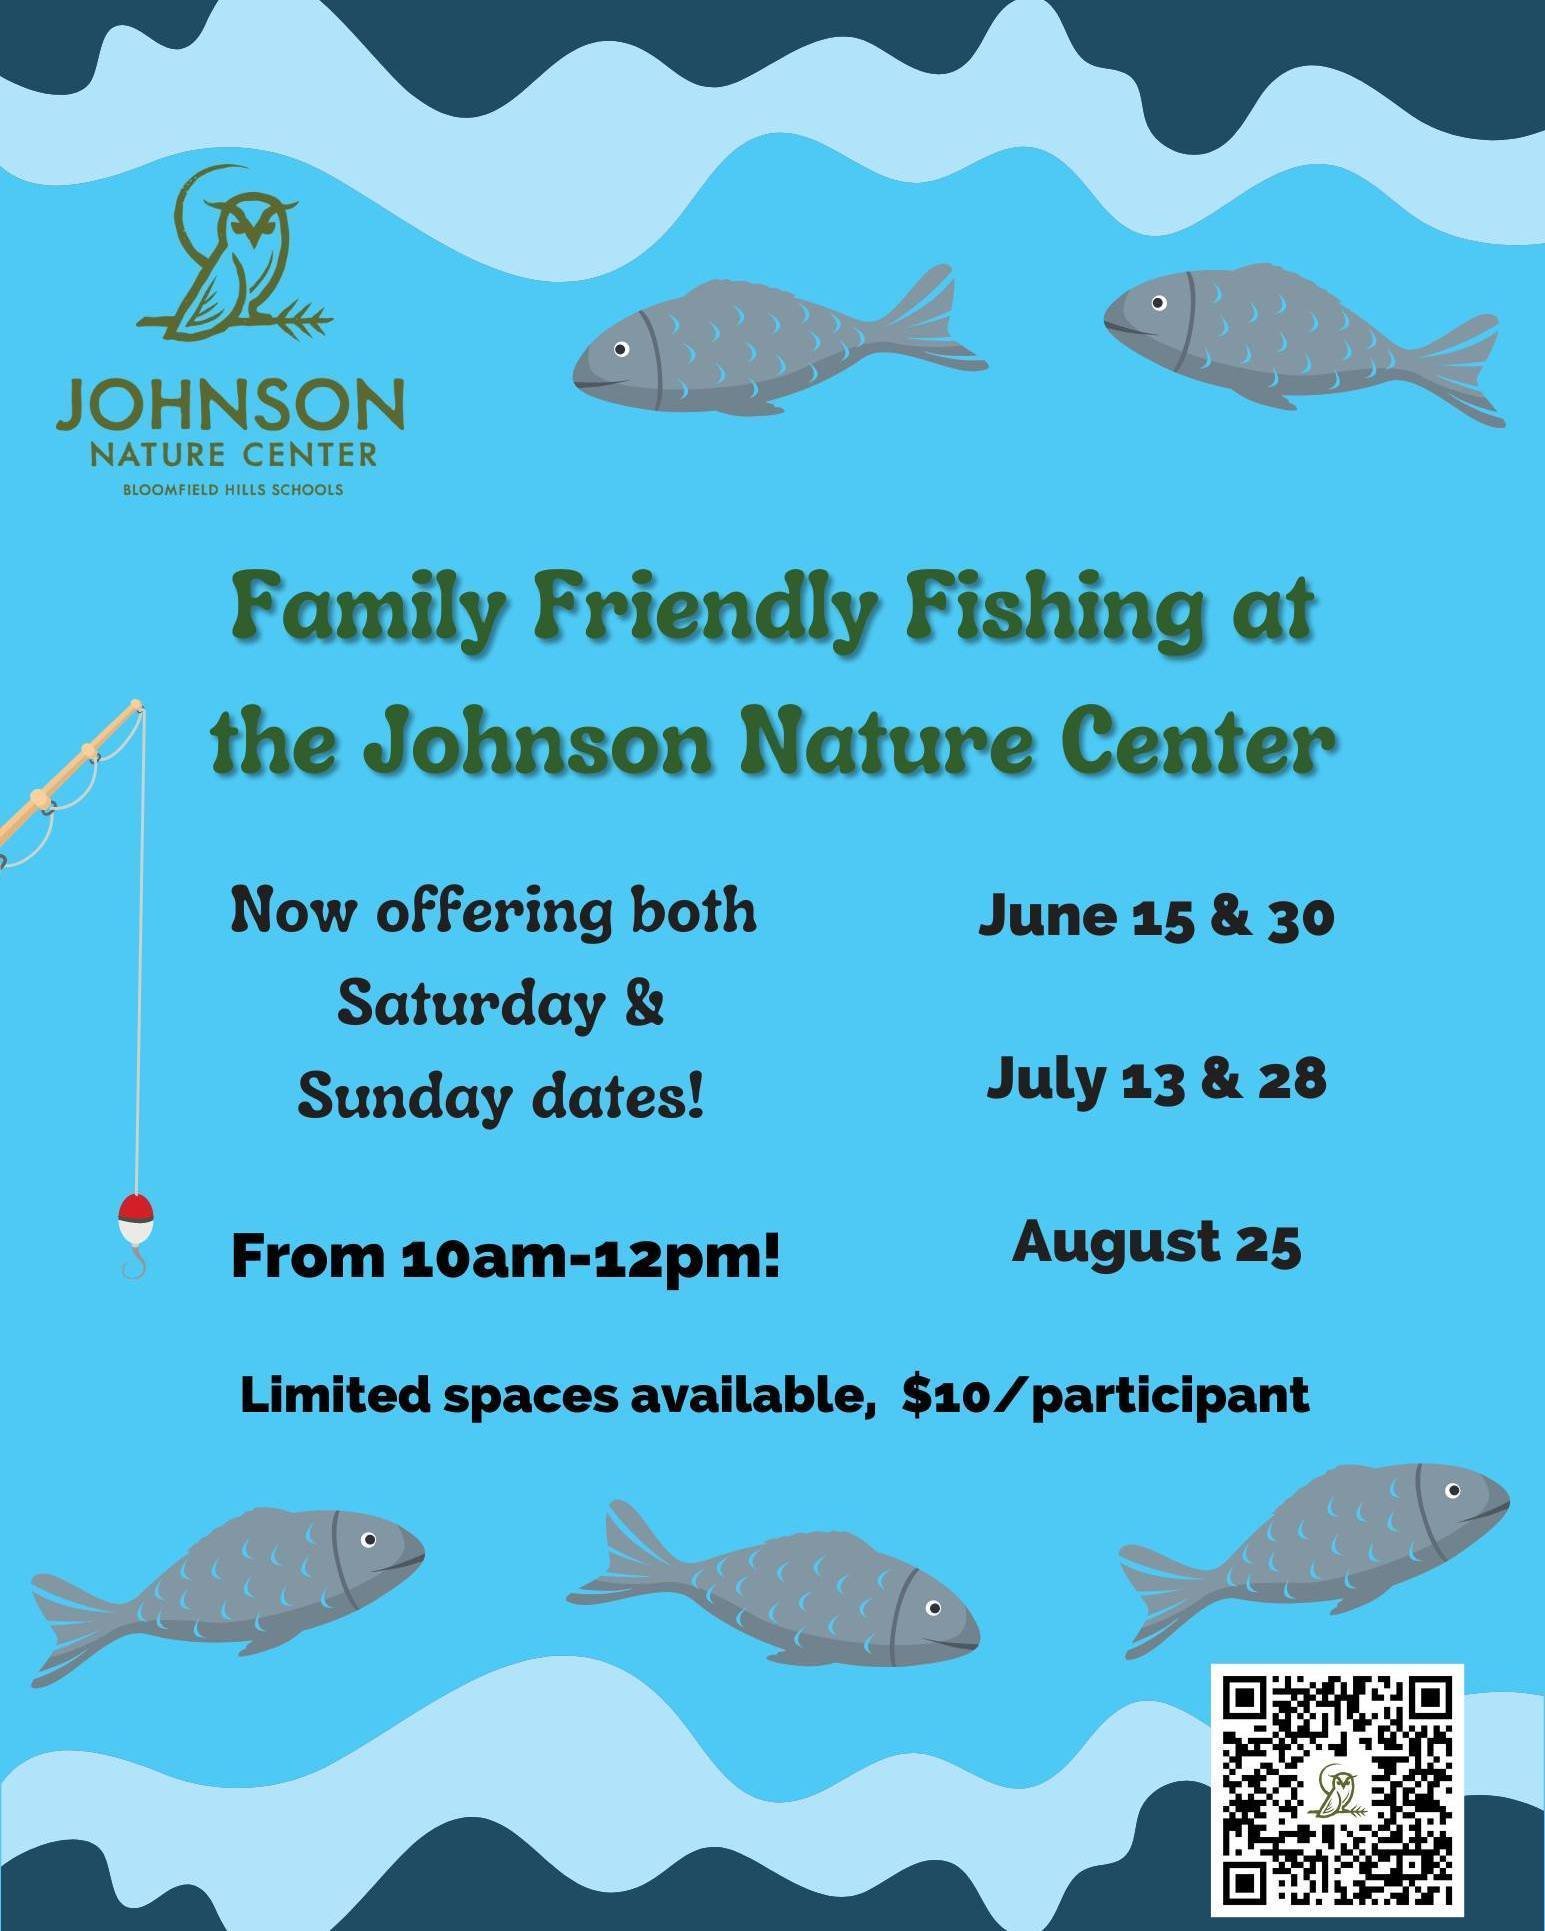 Registration is open on our website for all of our Family Fishing summer dates! From 10am to noon, enjoy a morning of catch and release fishing with family and friends using your own fishing gear, or borrowing from what the Nature Center has to offer